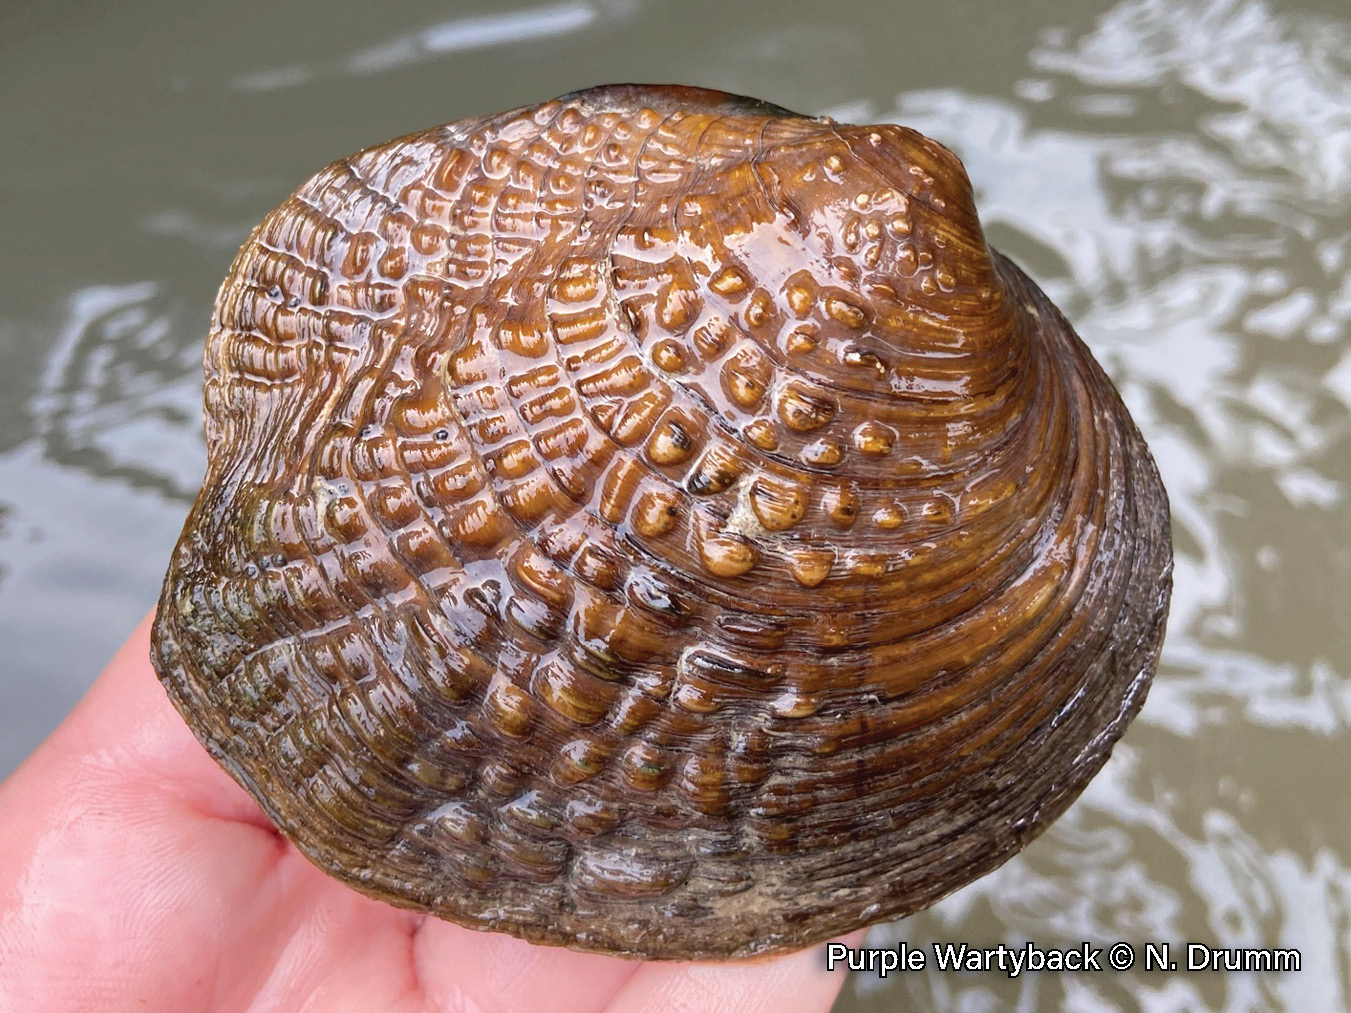 Picture of a Purple Wartyback mussel in a hand, a rich brown, medium-sized mussel that is covered in bumps